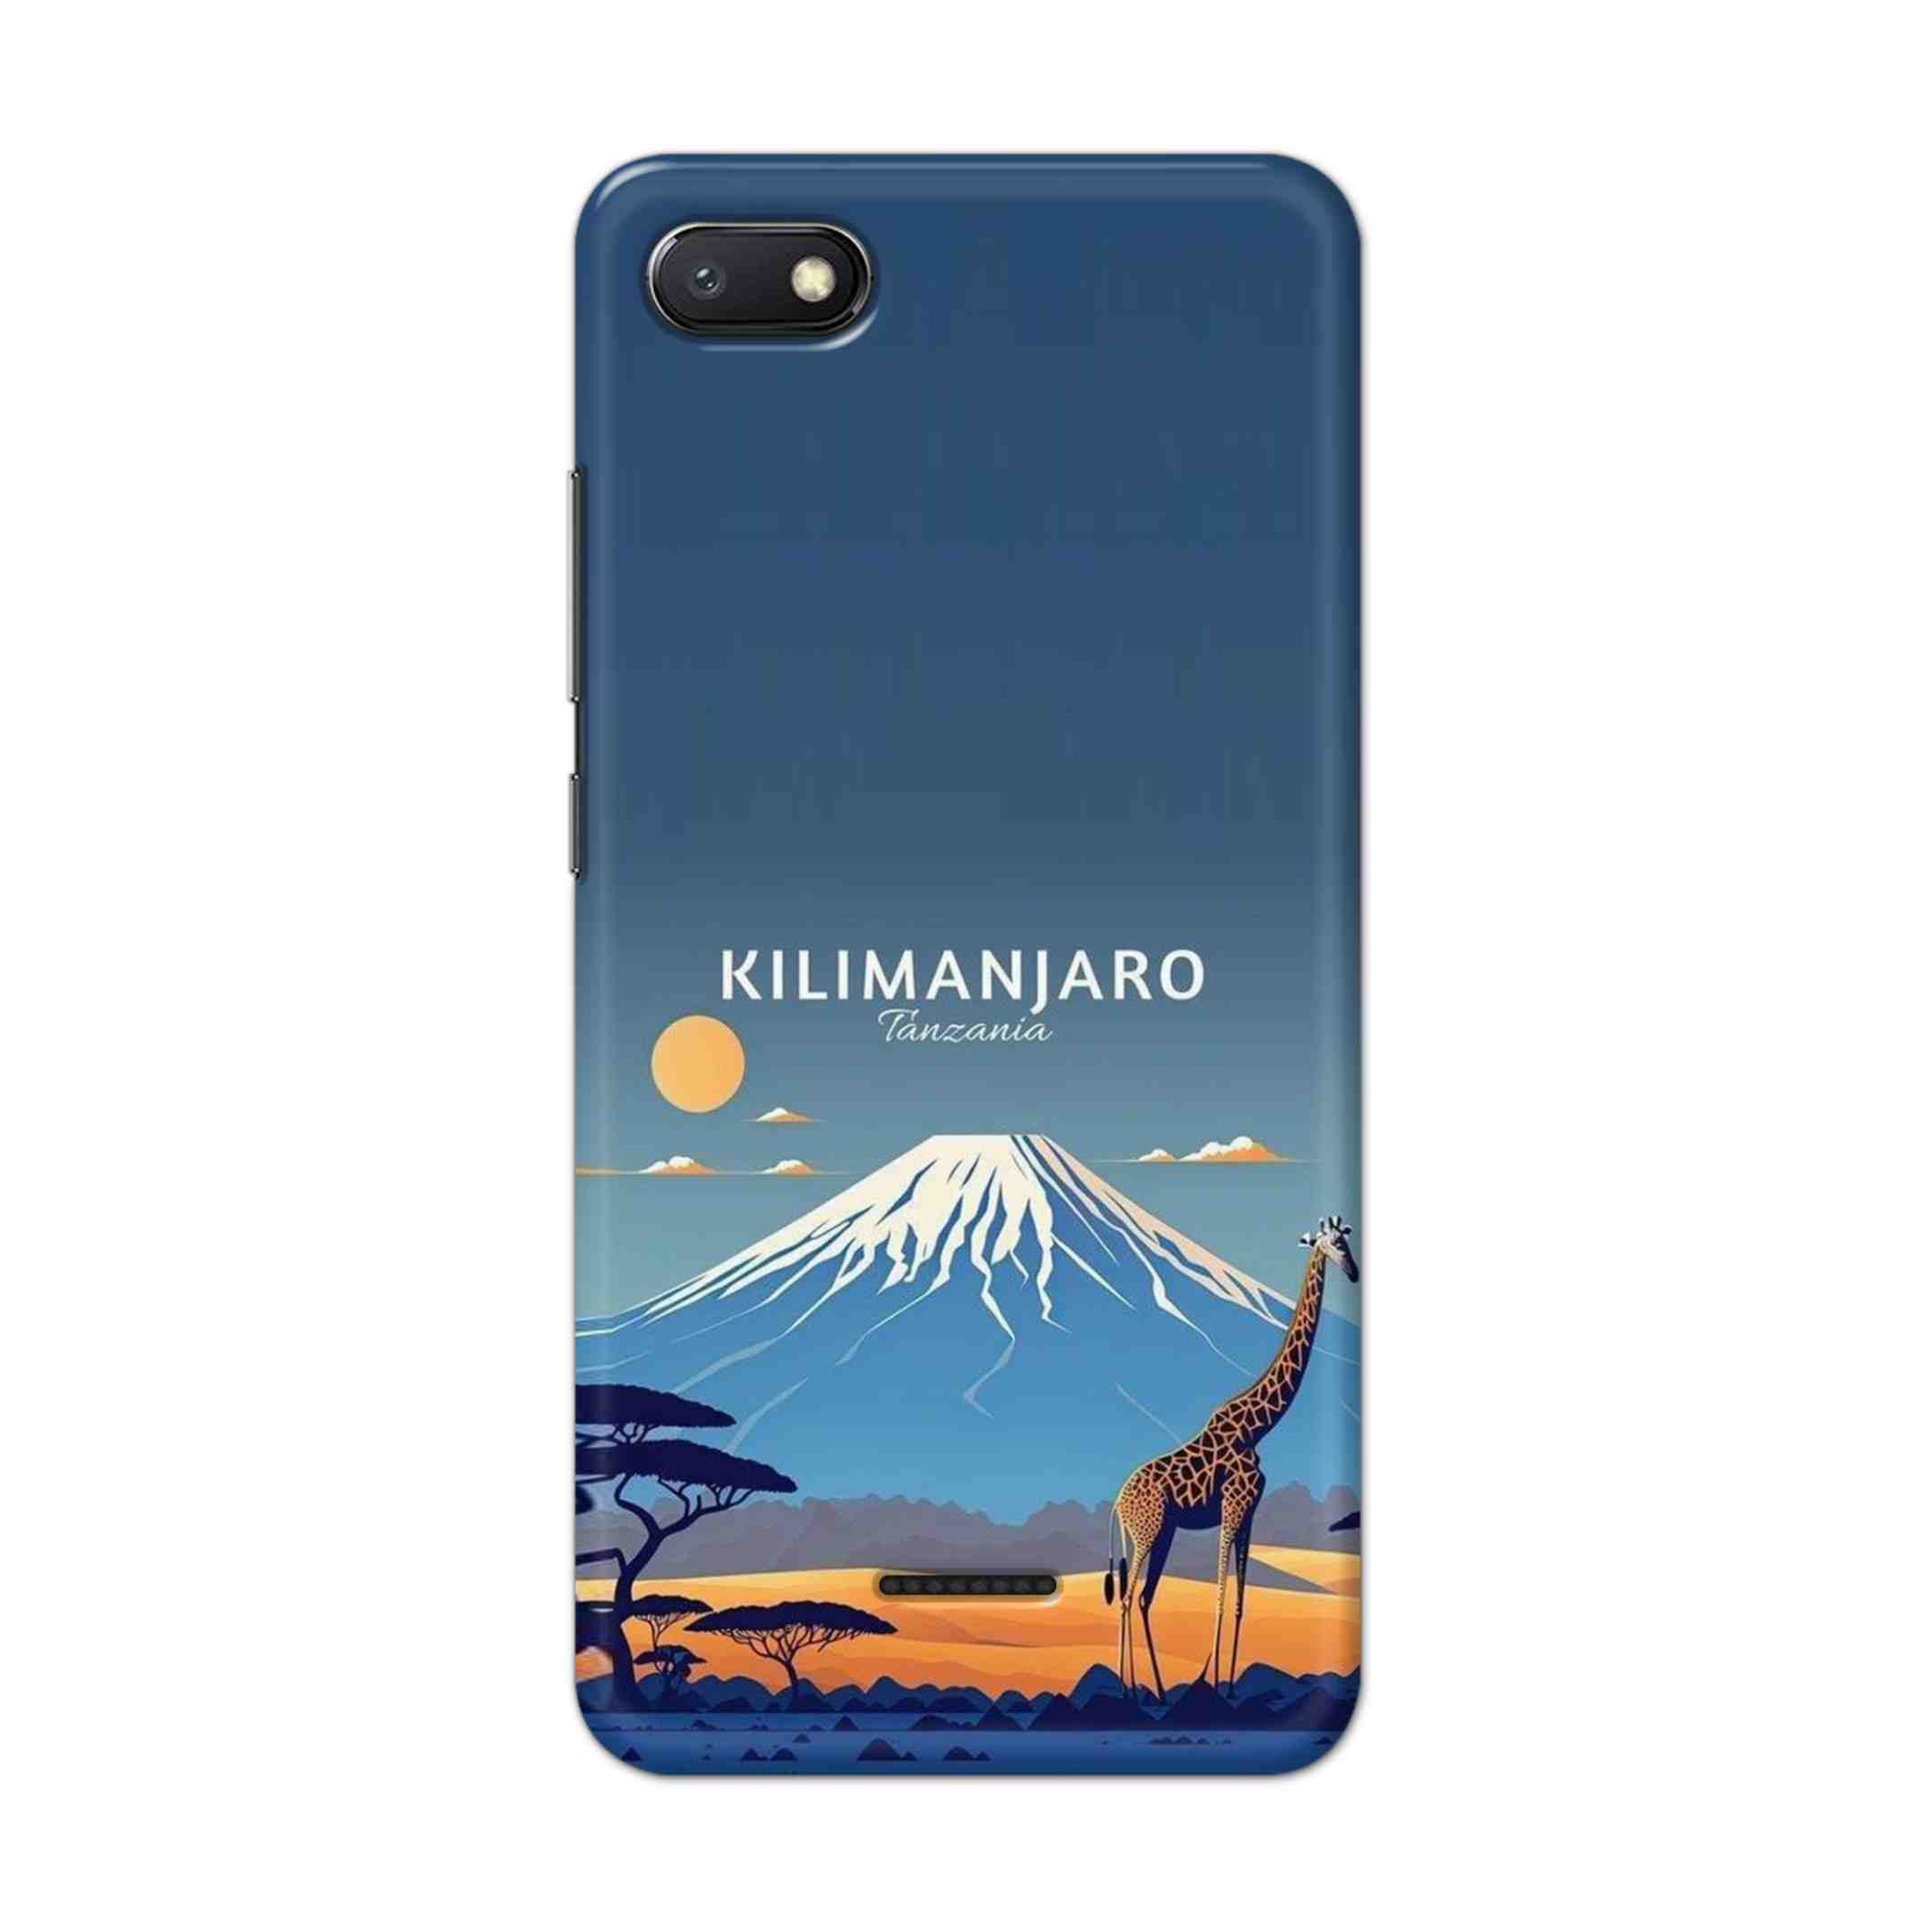 Buy Kilimanjaro Hard Back Mobile Phone Case/Cover For Xiaomi Redmi 6A Online